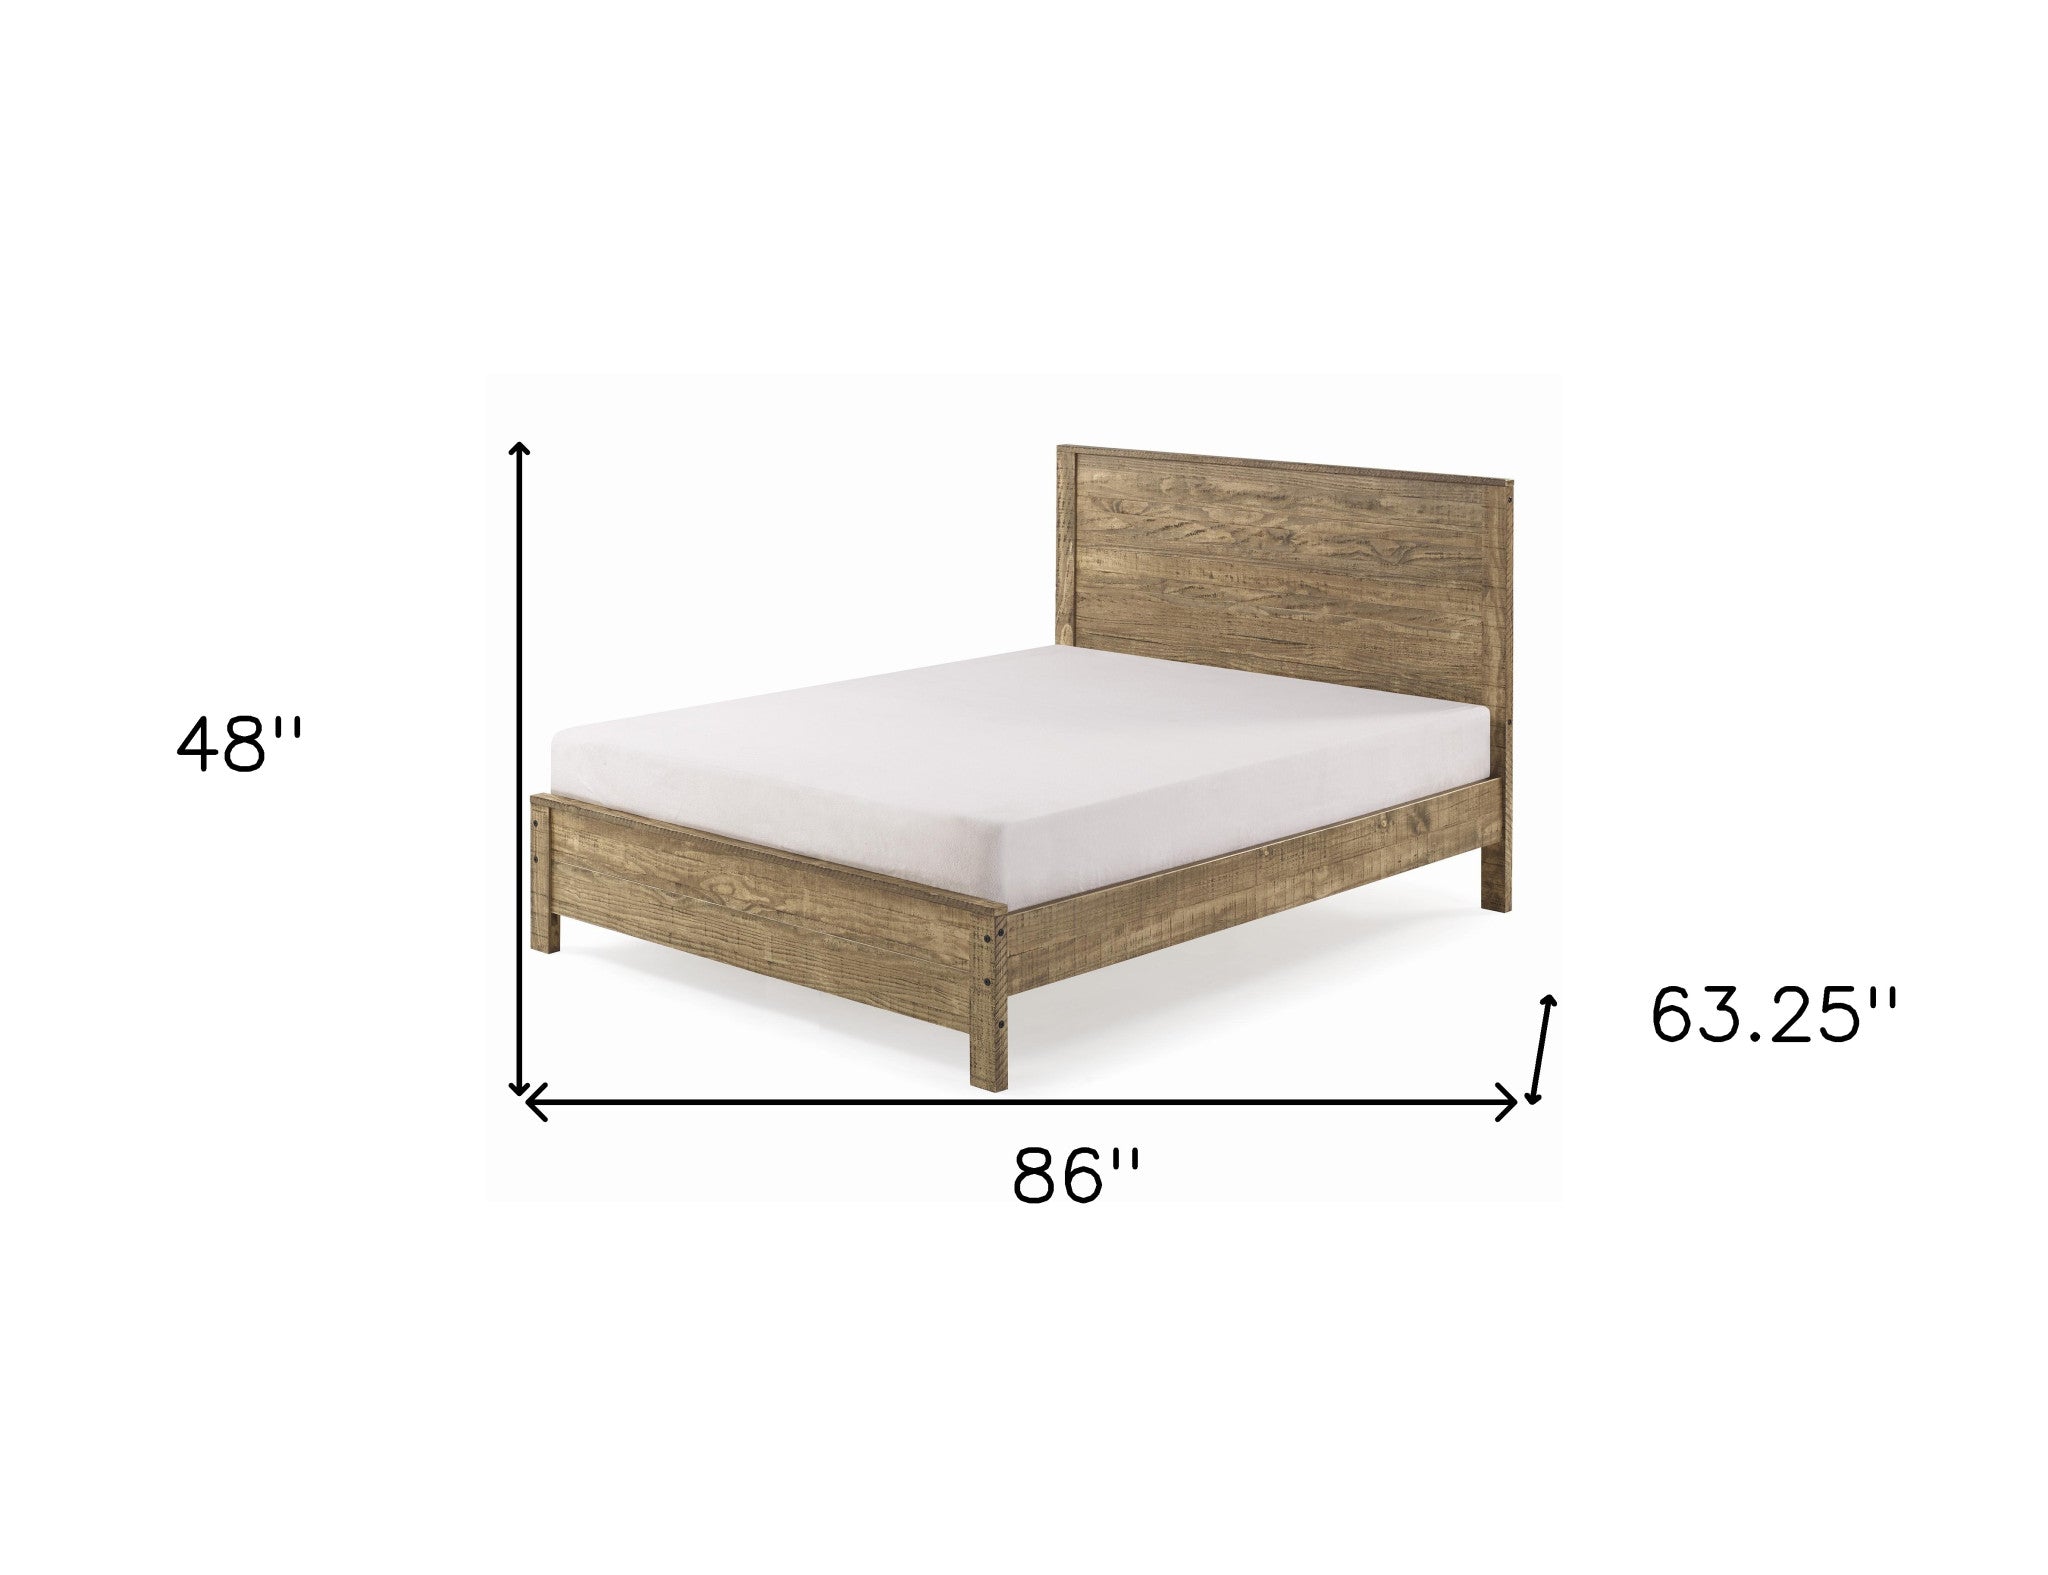 Walnut Brown Solid Wood Queen Bed Frame